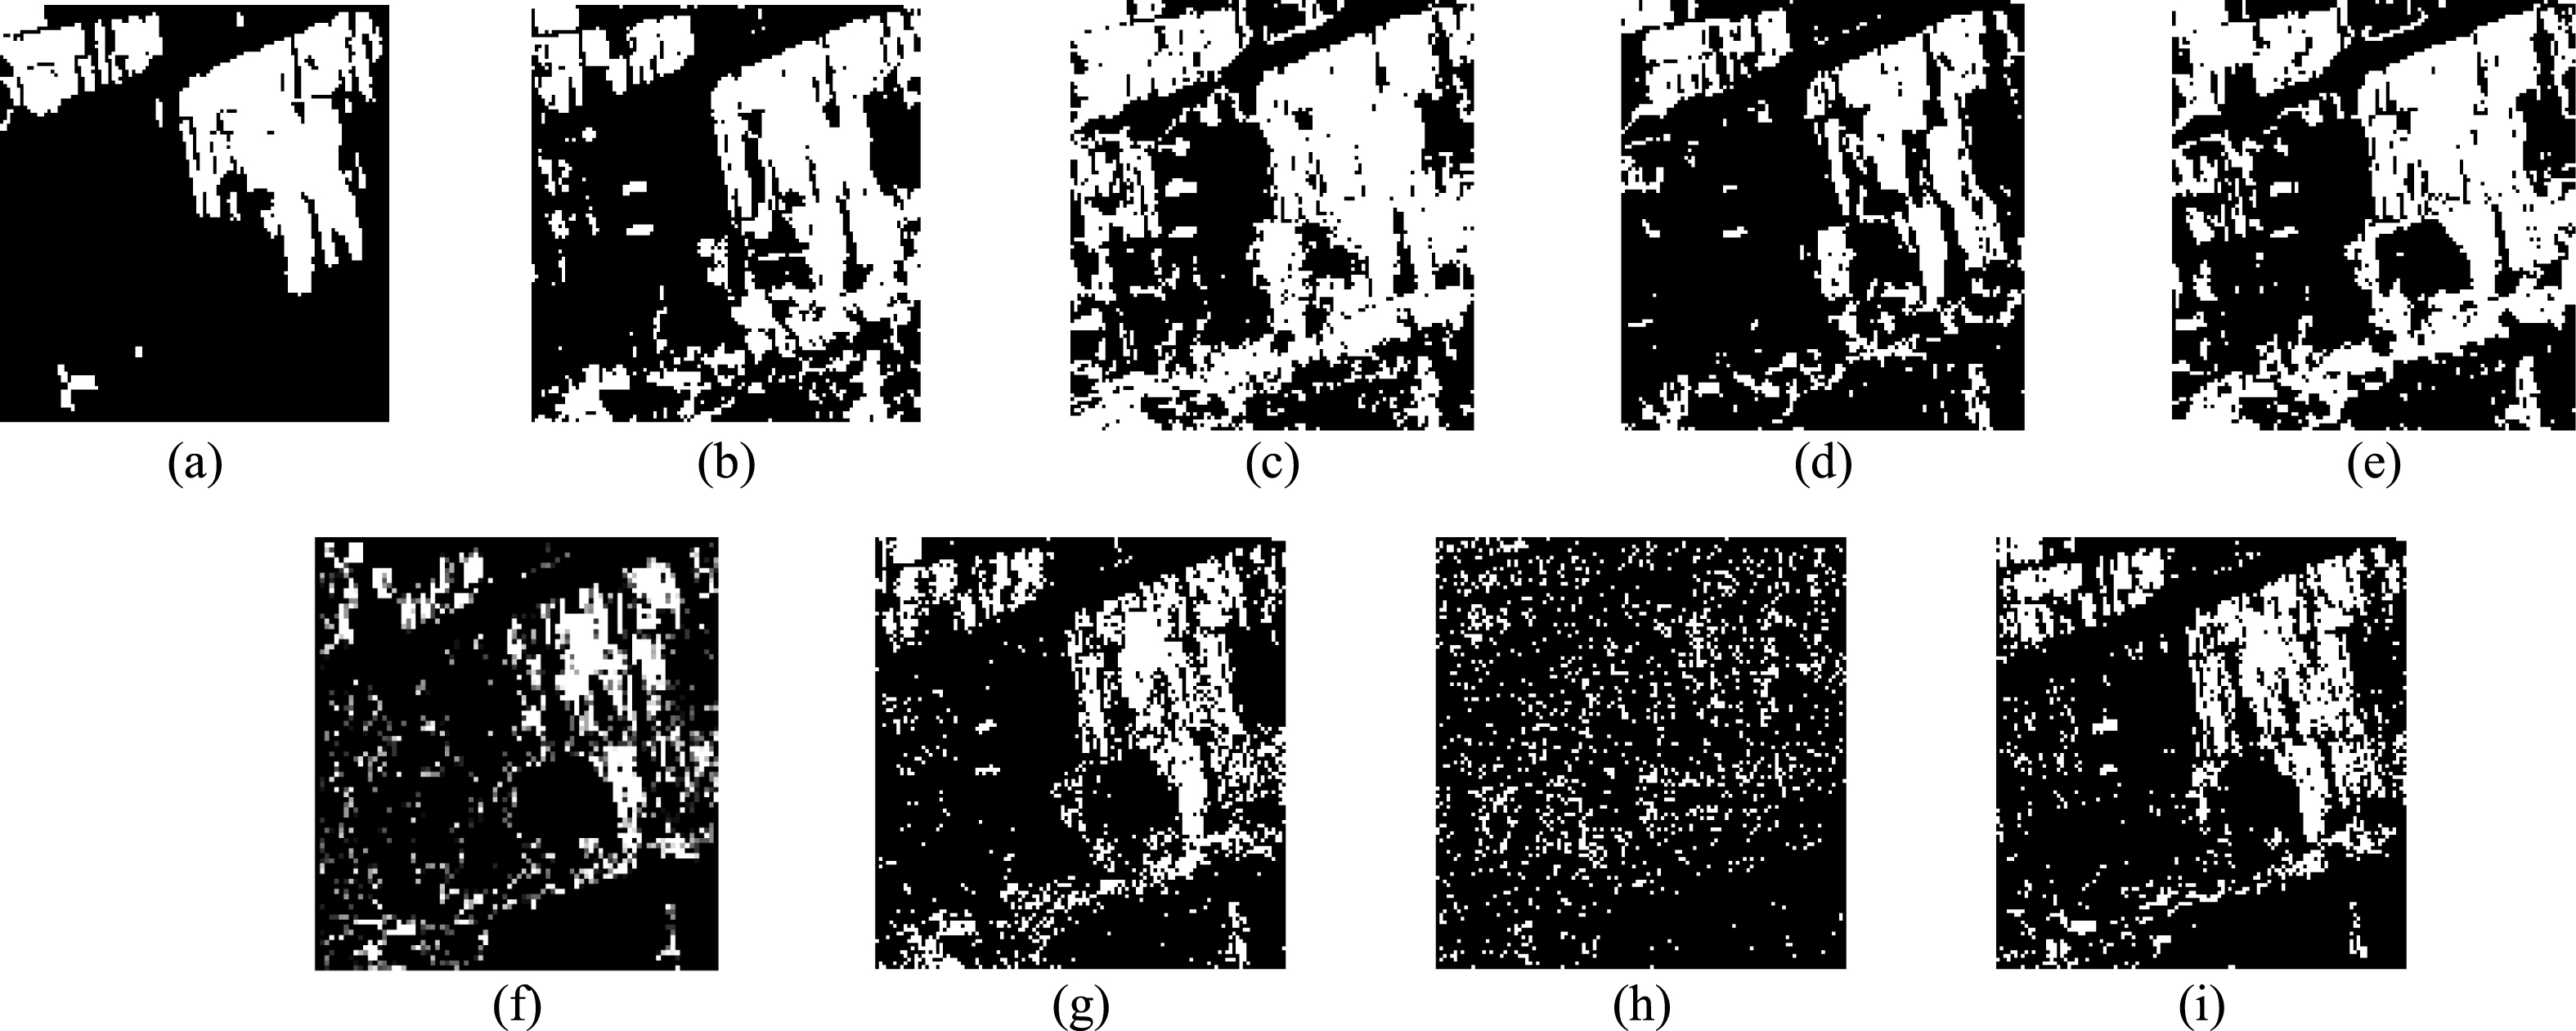 Classification results of the second dataset with different methods. (a) Ground truth;
 (b) Mahal Dist; (c) Parallel; (d) Max Likeli; (e) Mini Diste; (f) SVM; (g) Adaboost_FAM (spectrum); (h) Adaboost_FAM
 (texture); and (i) Adaboost_FAM (spectrum + texture).